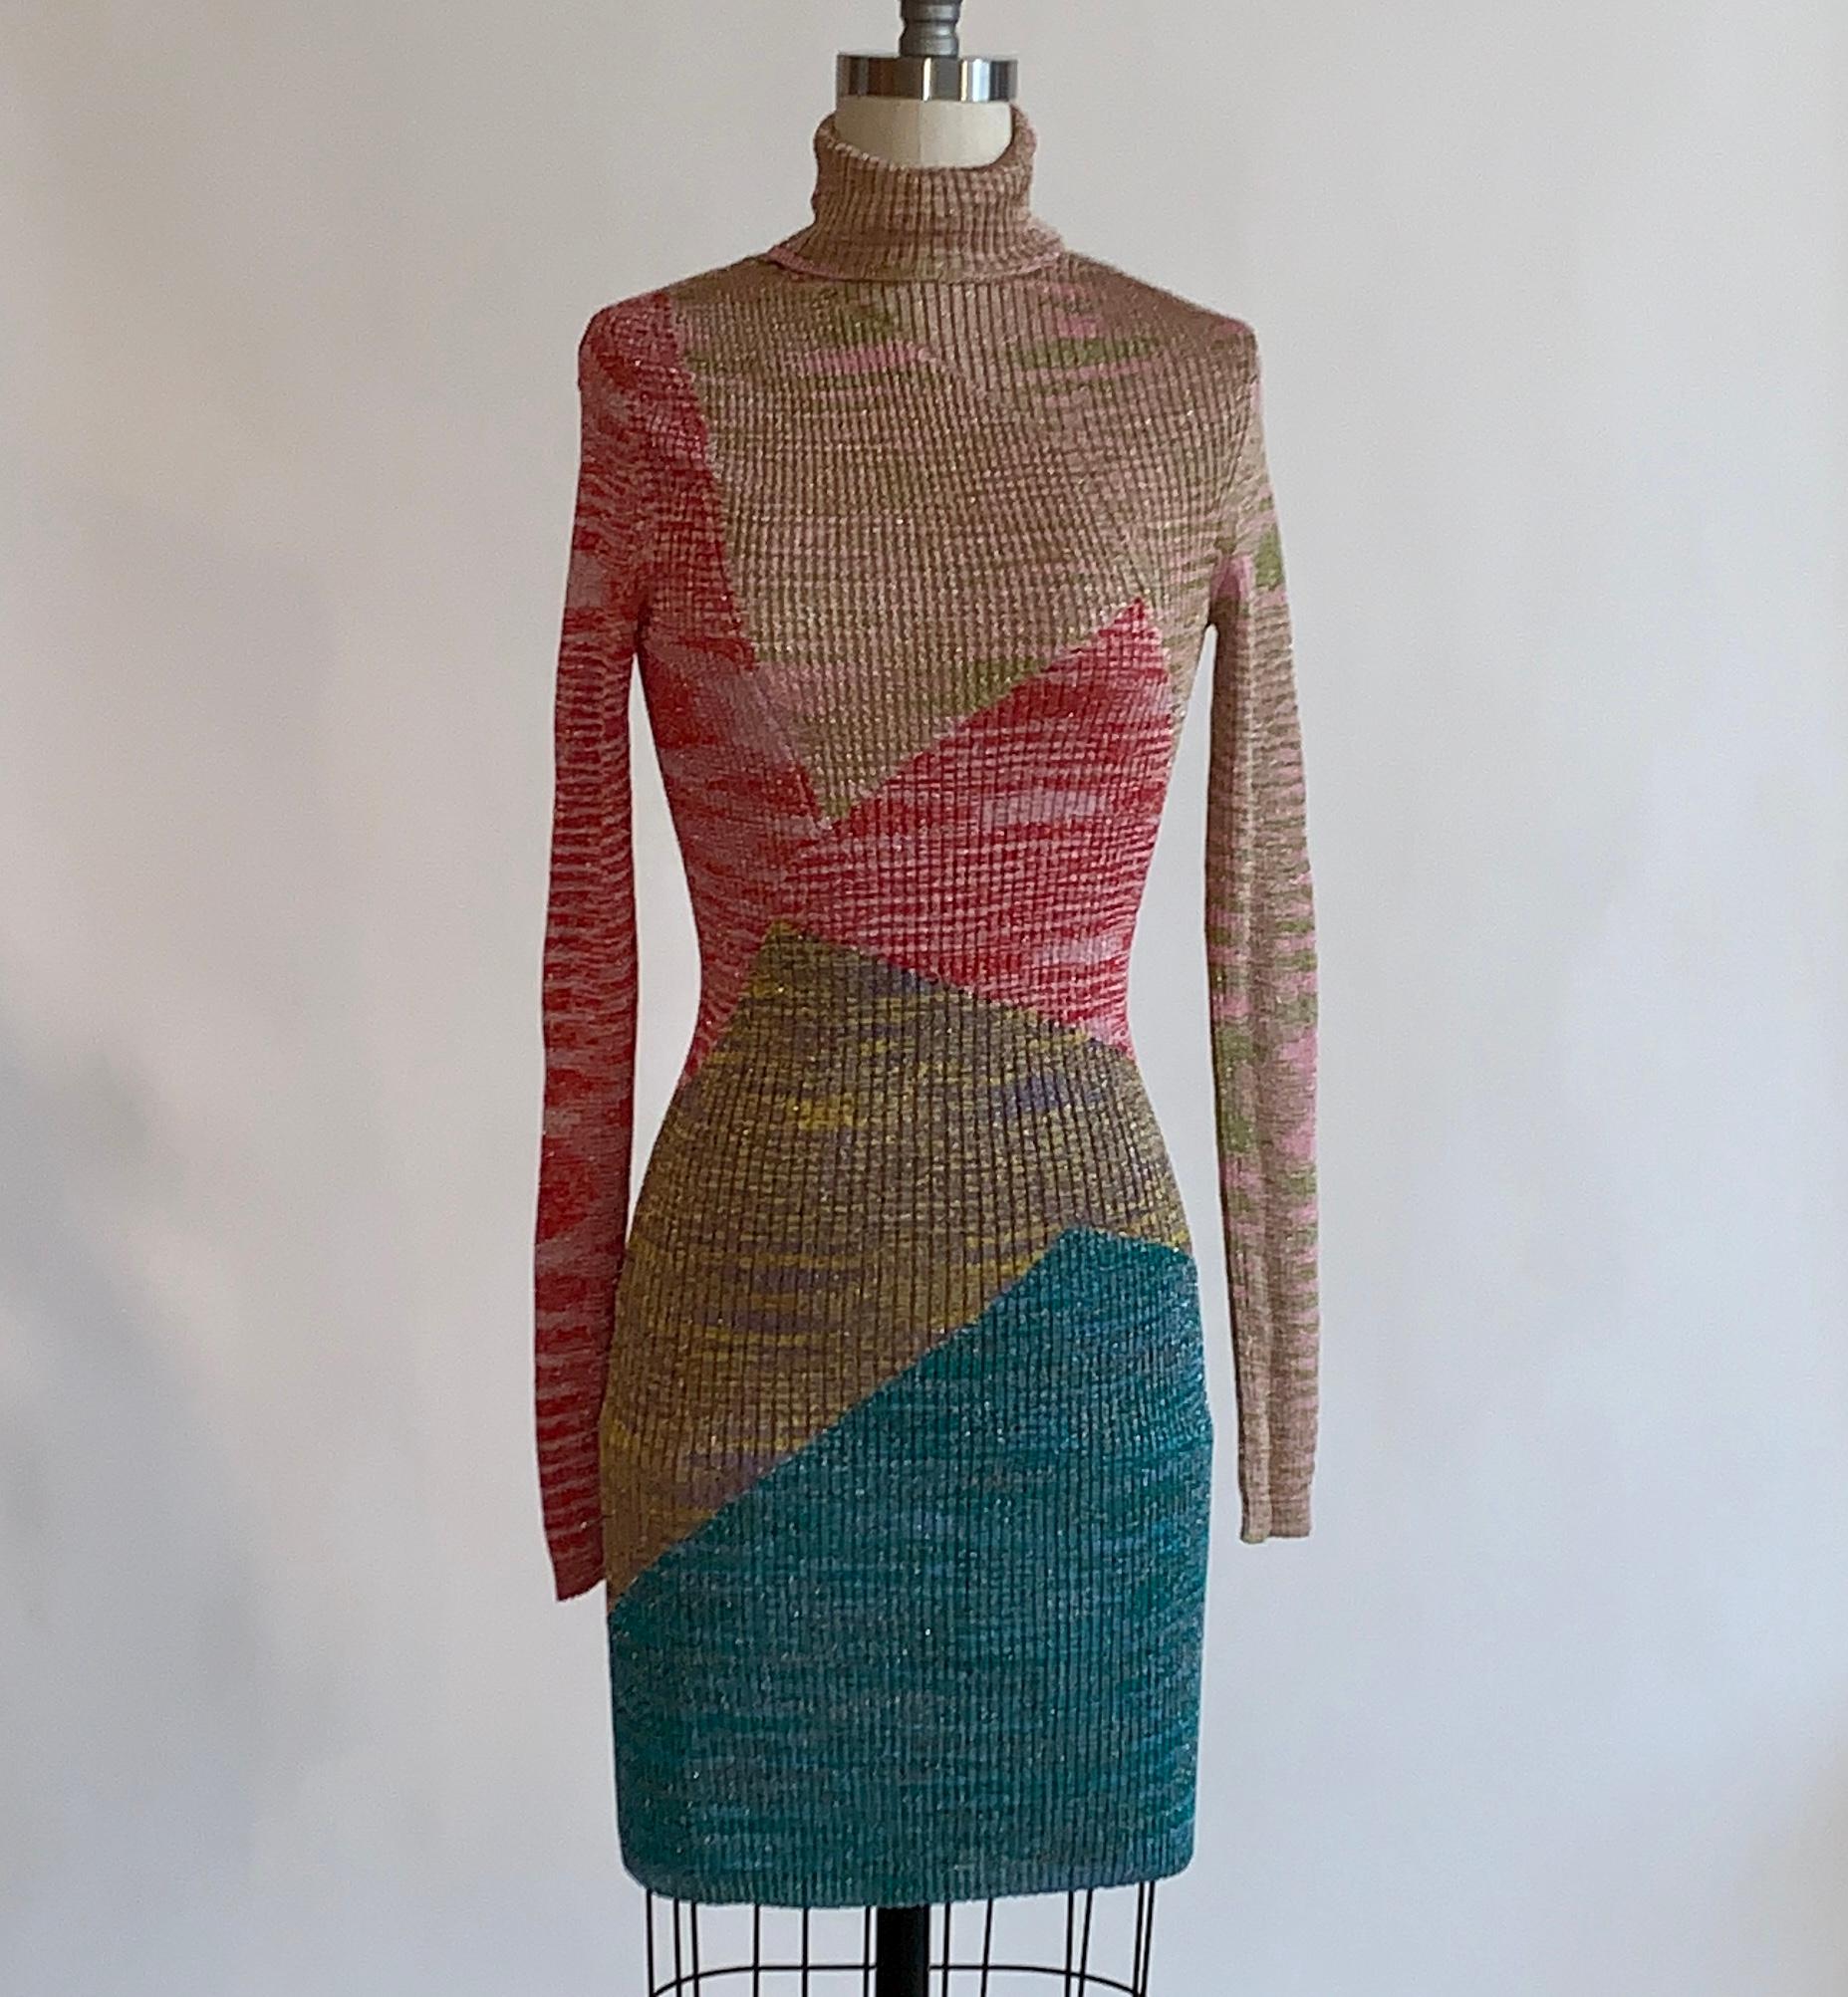 Missoni long sleeved geometric knit dress in metallic pink, orange, lavender,  gold, and blue. Ribbed knit with turtleneck and long sleeves. Pulls on. A very slight sheerness to the fabric, you may want to add a slip beneath. 

64% viscose, 23%